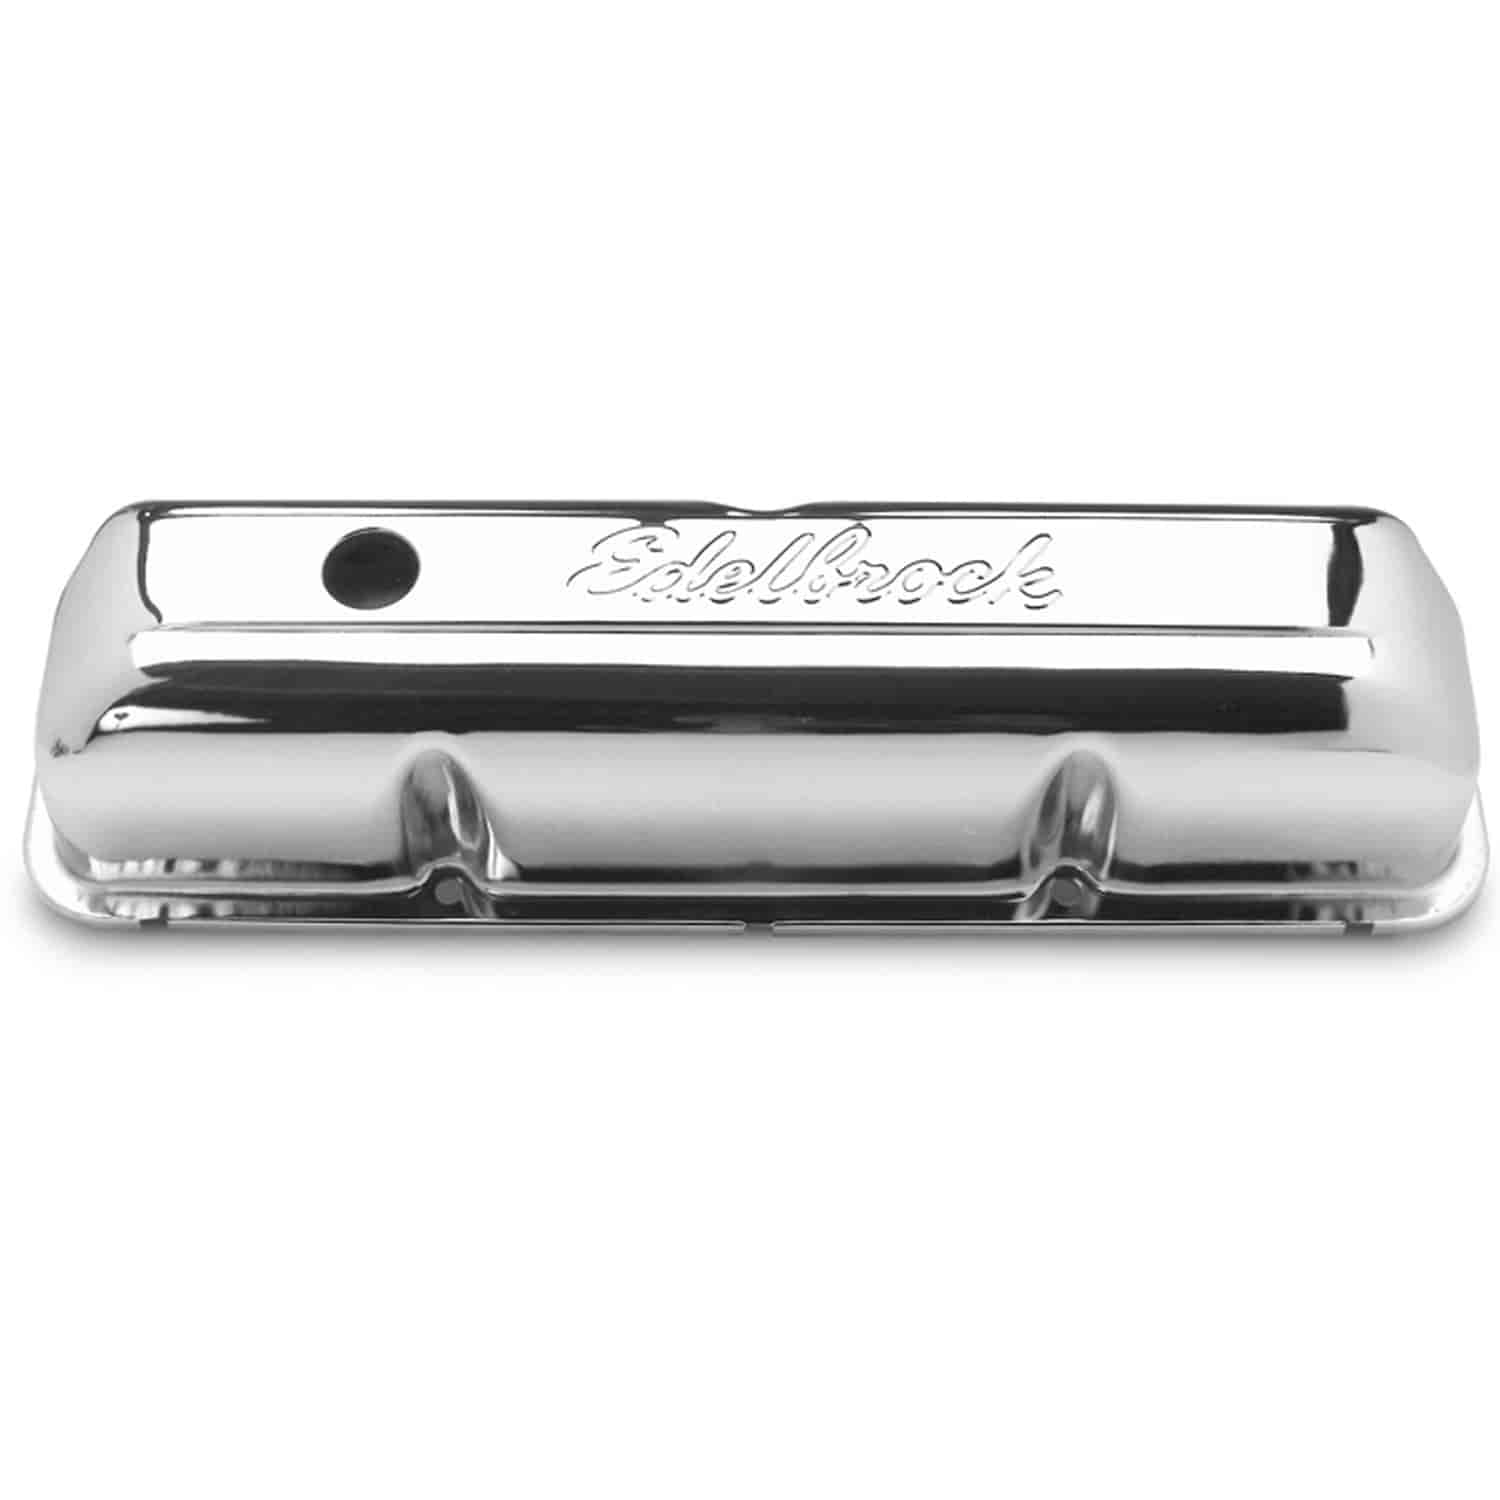 Signature Series Valve Covers 1958-1976 Ford FE 332-428